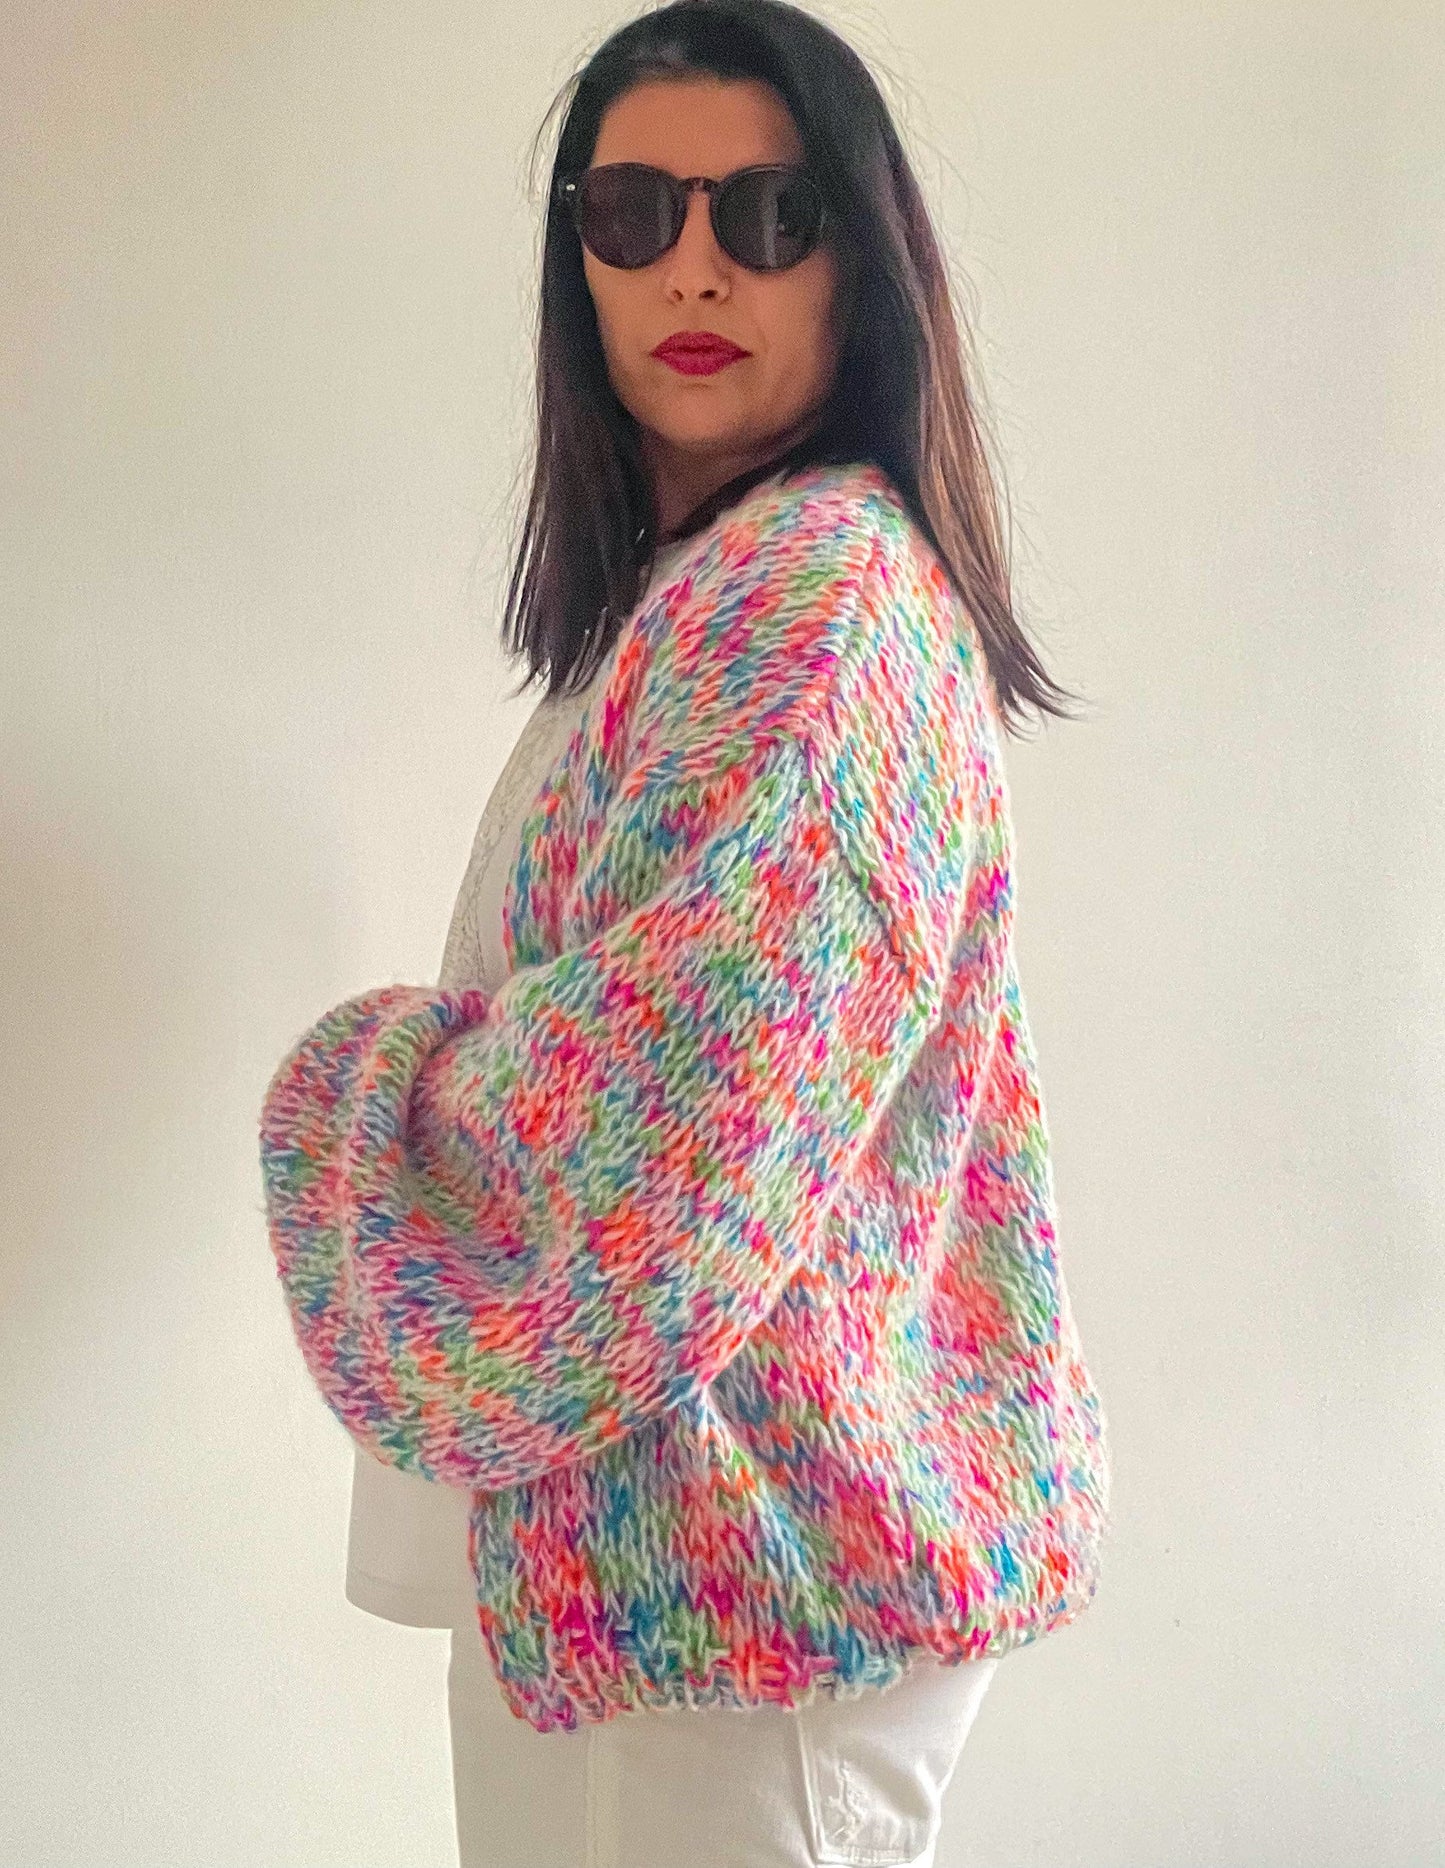 BONBON Knit Cardigan, Multicolor Mohair Cardigan, Colorful Sweater, Ready to Ship